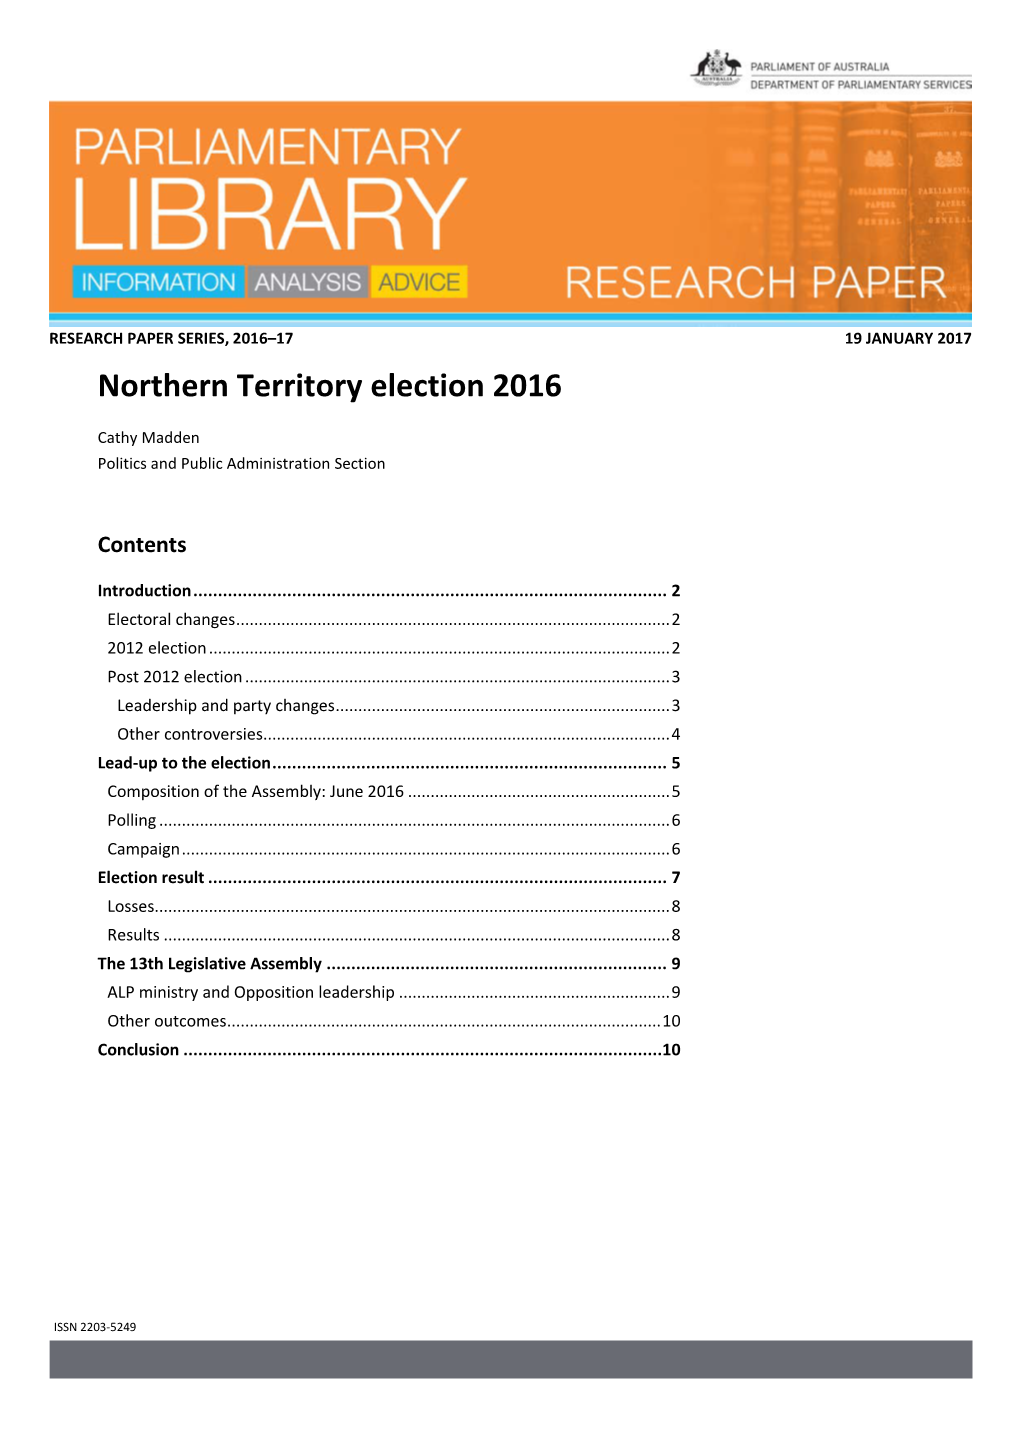 Northern Territory Election 2016